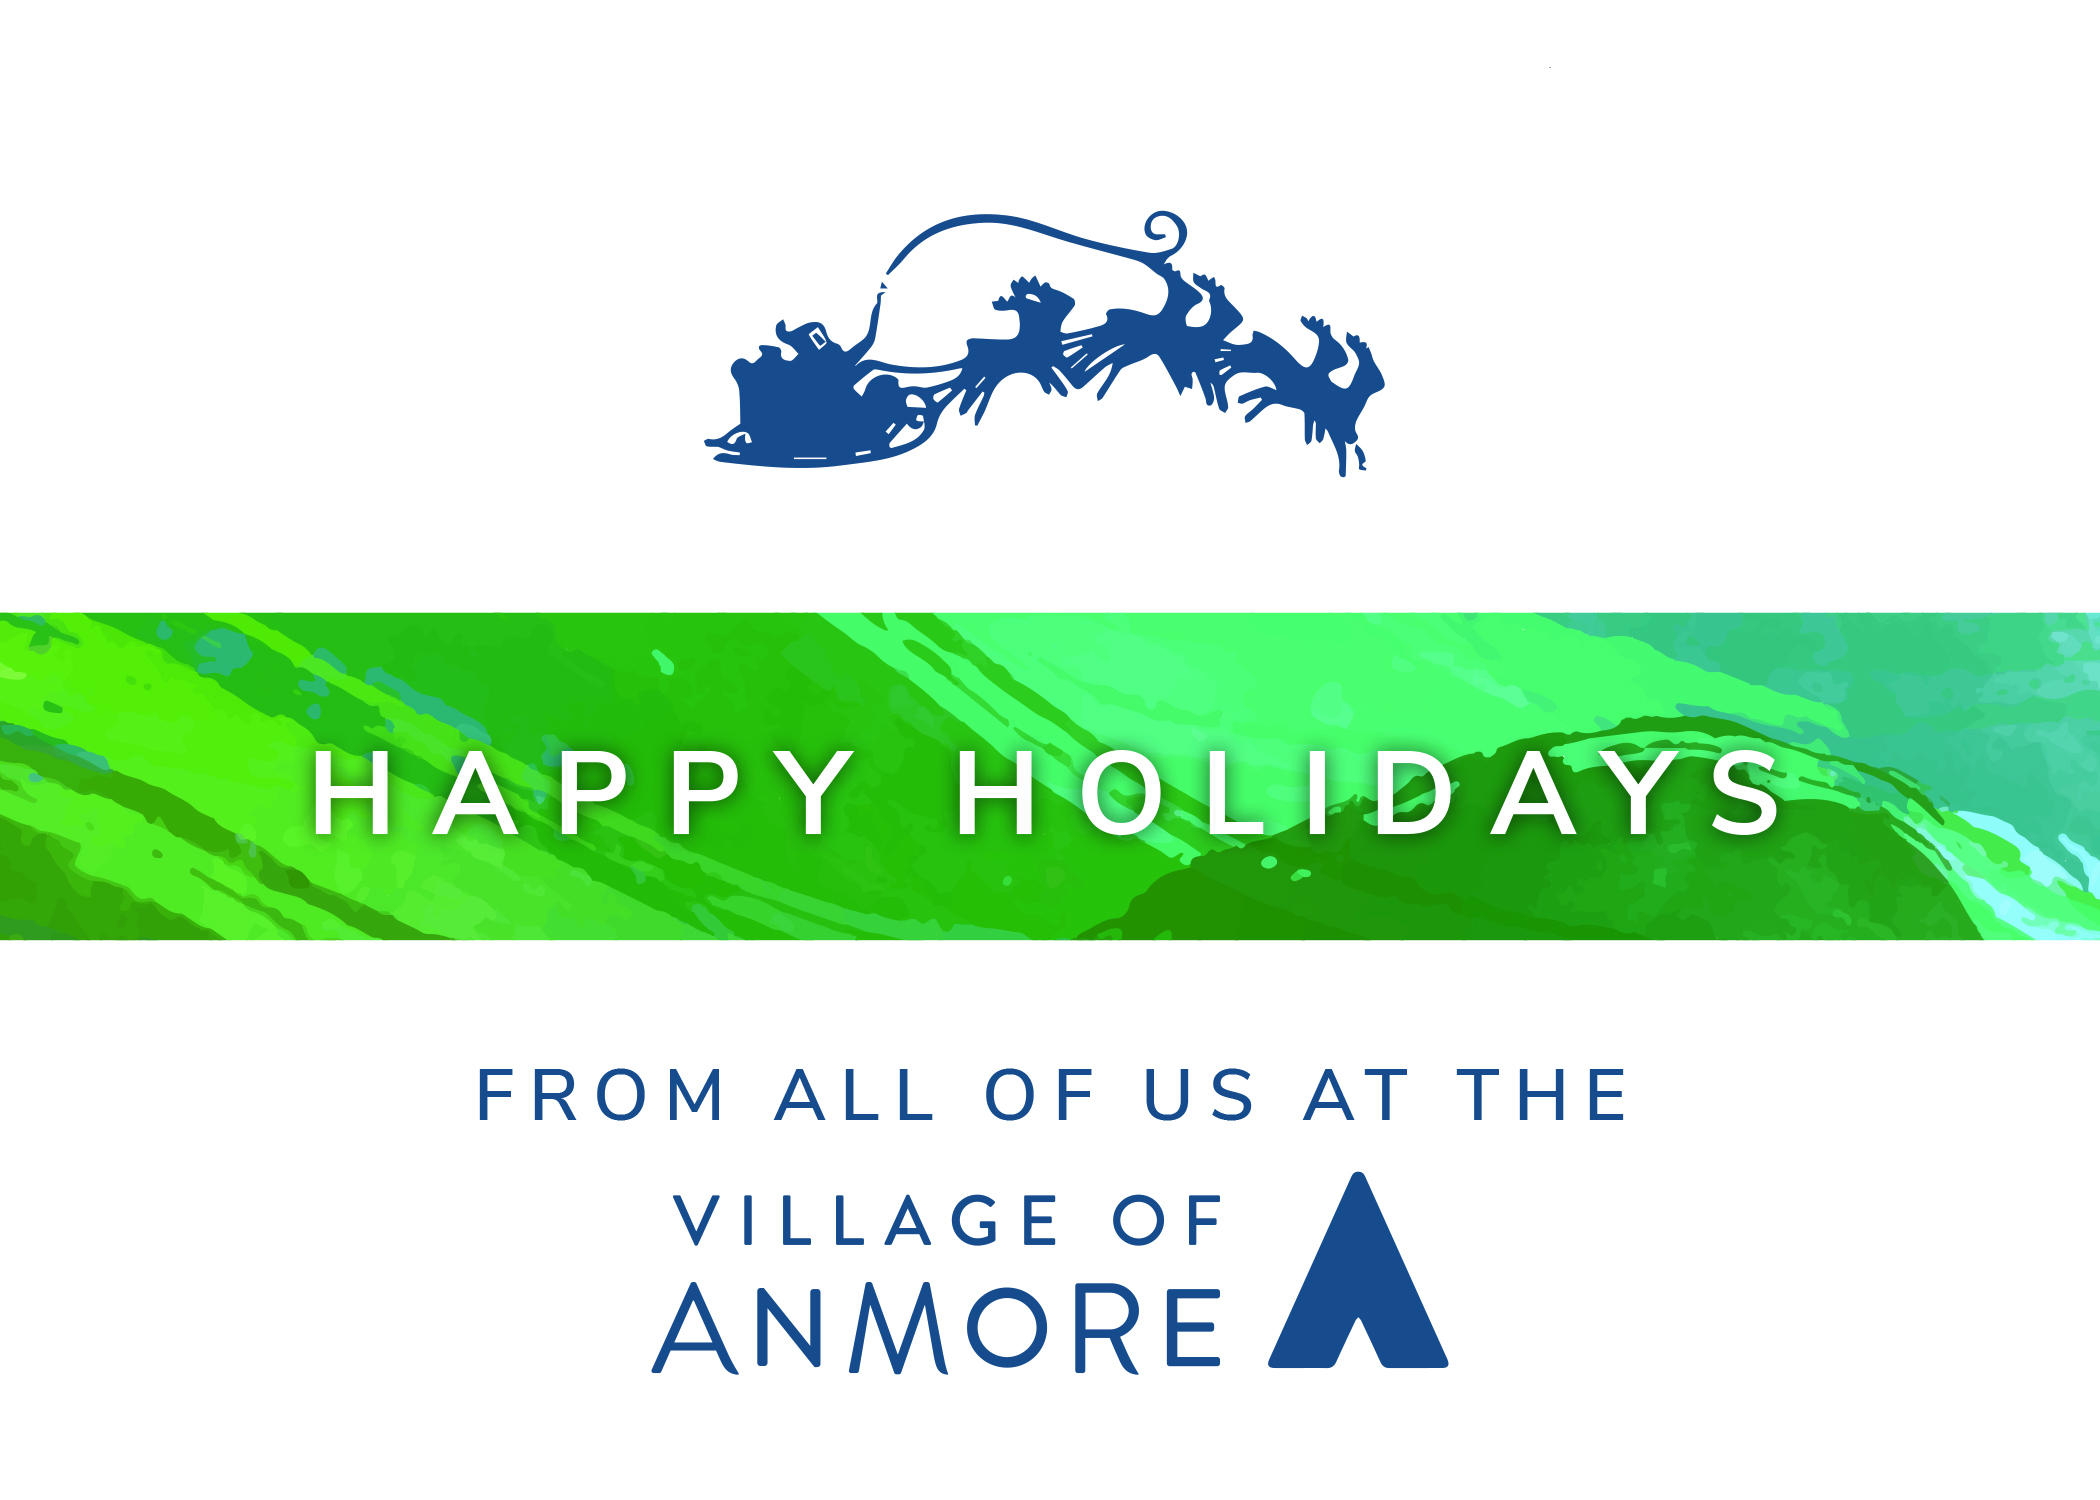 Village of Anmore Christmas Card for Email